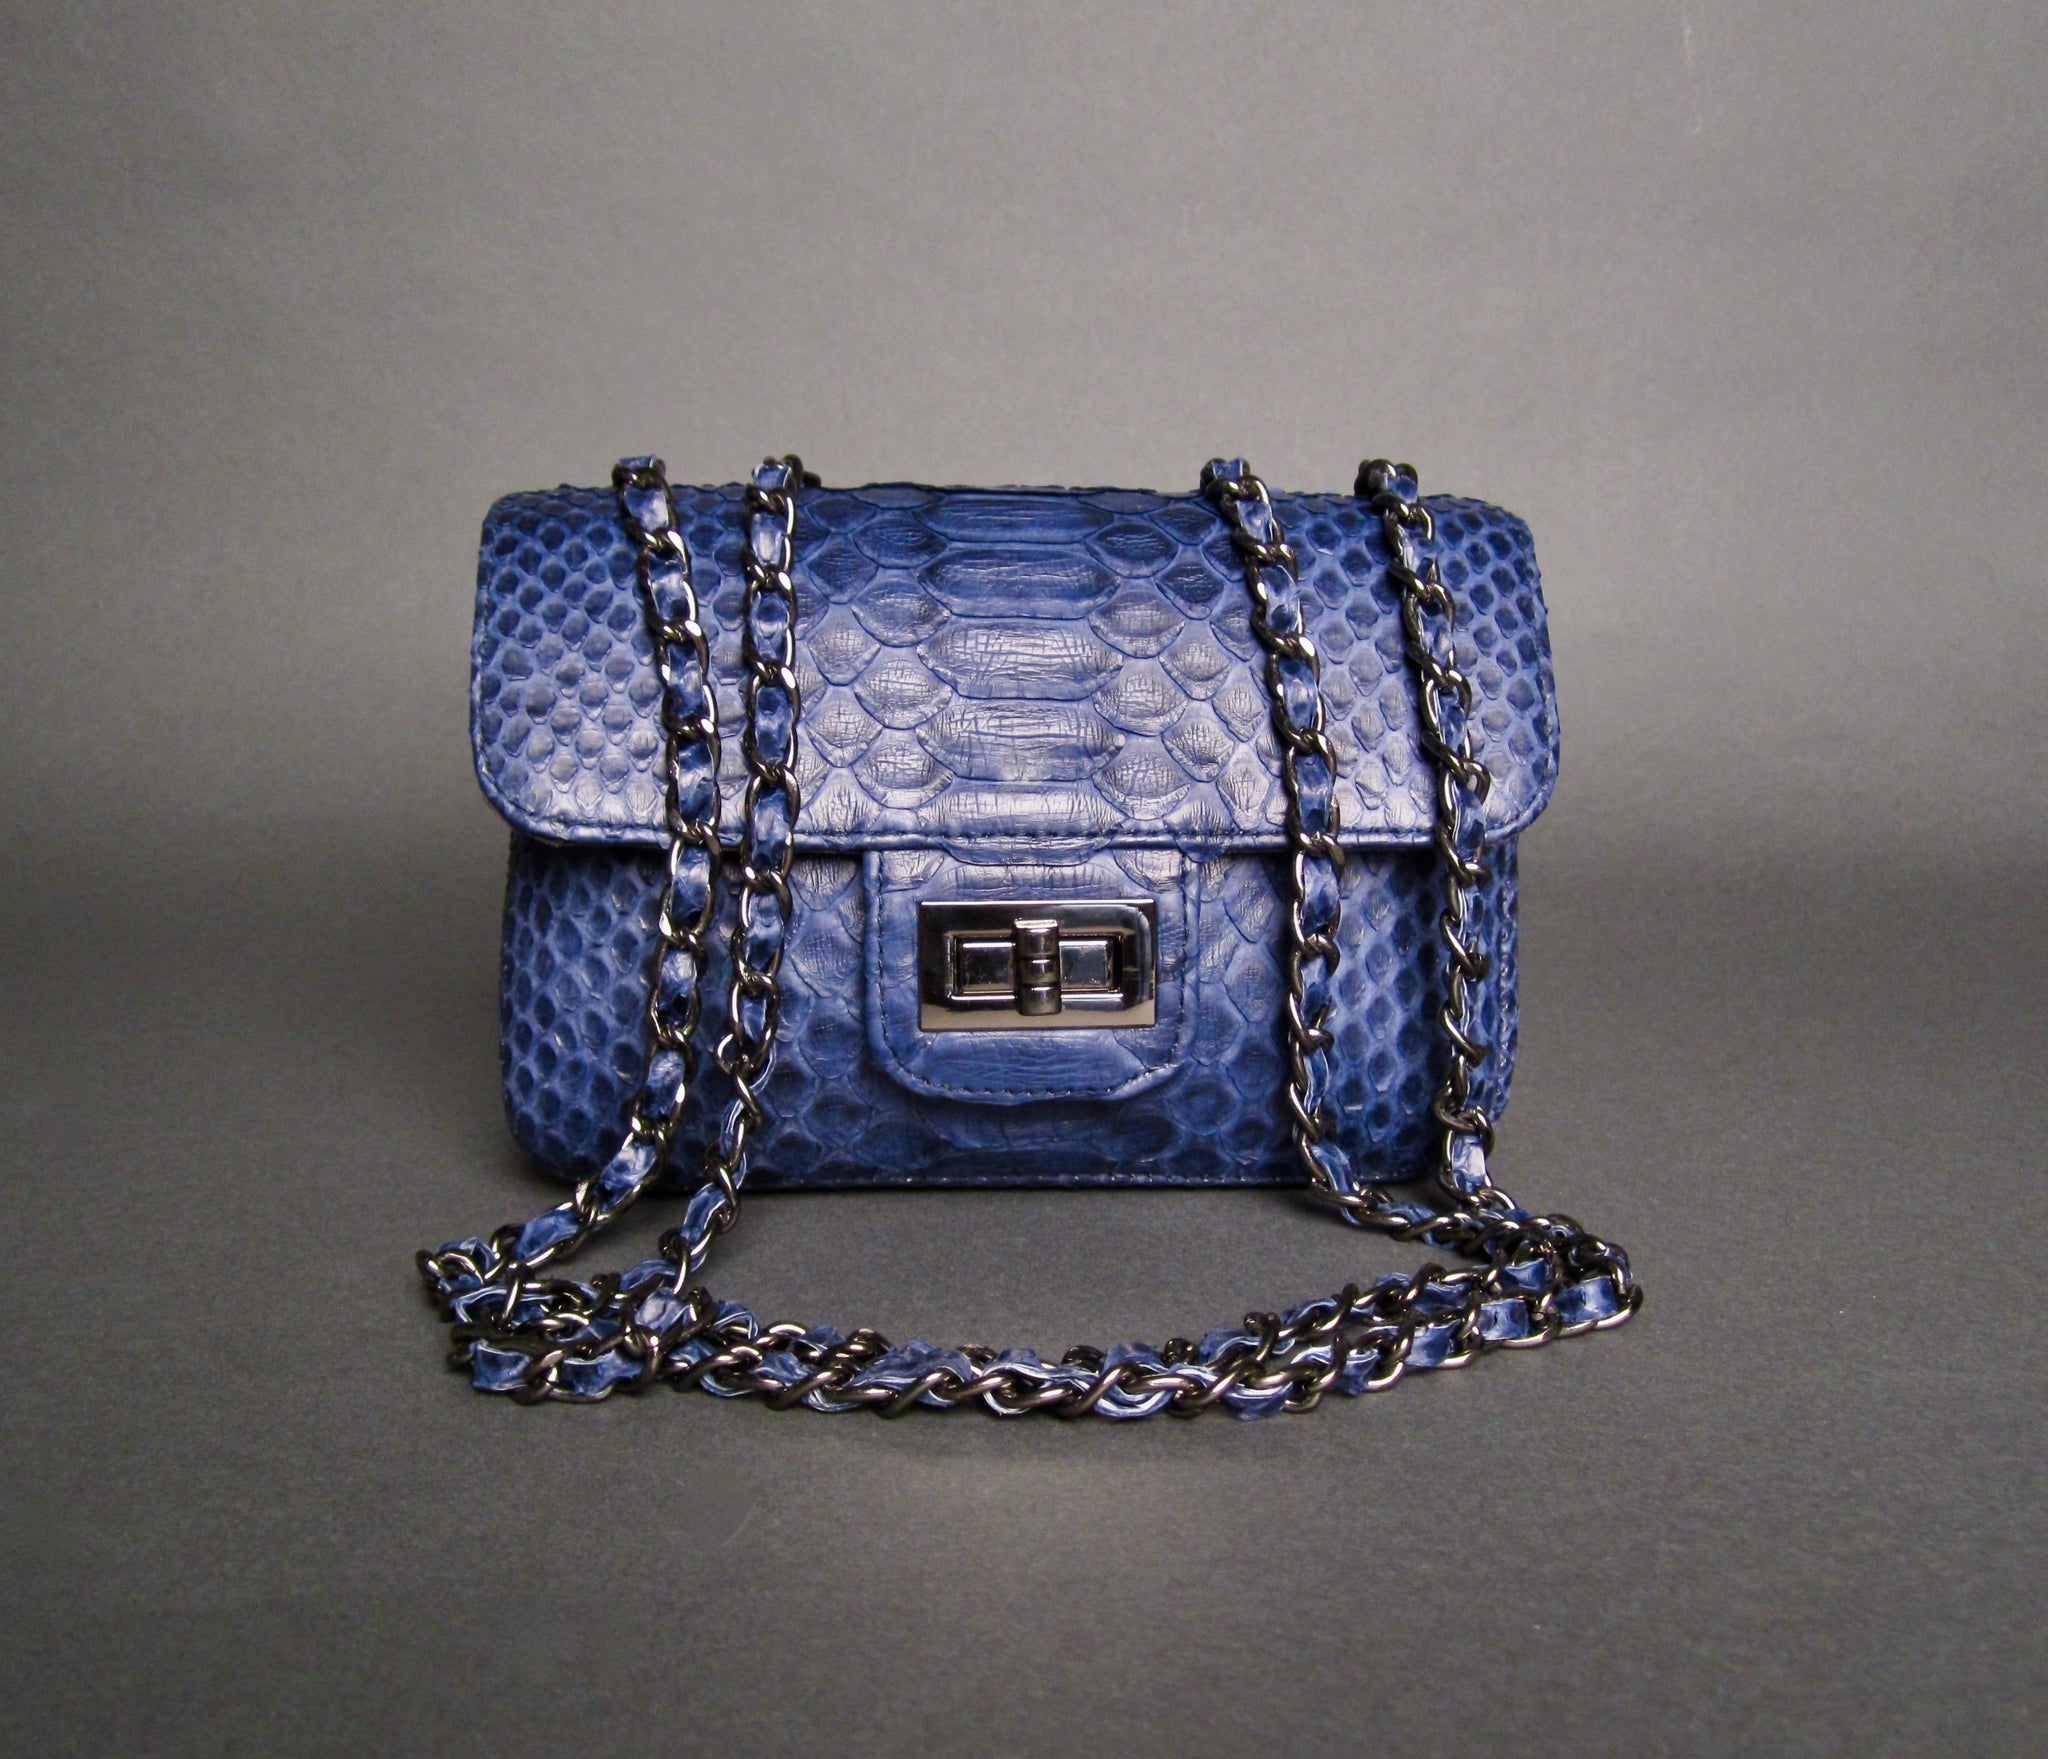 ▷ Chanel bag by James Chiew, 2021, Print